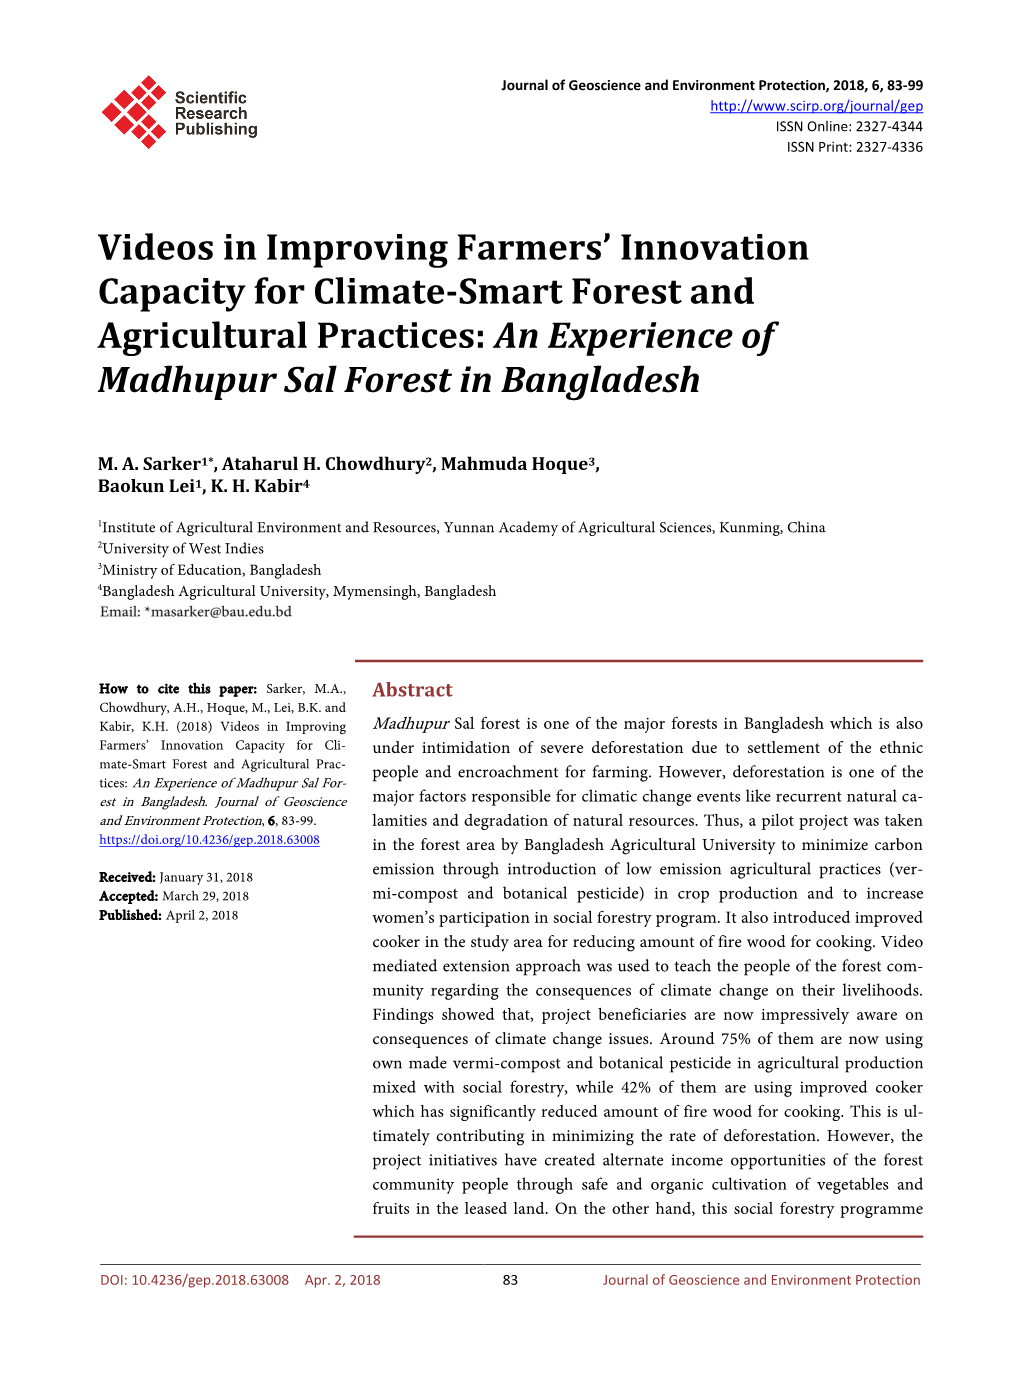 Videos in Improving Farmers' Innovation Capacity for Climate